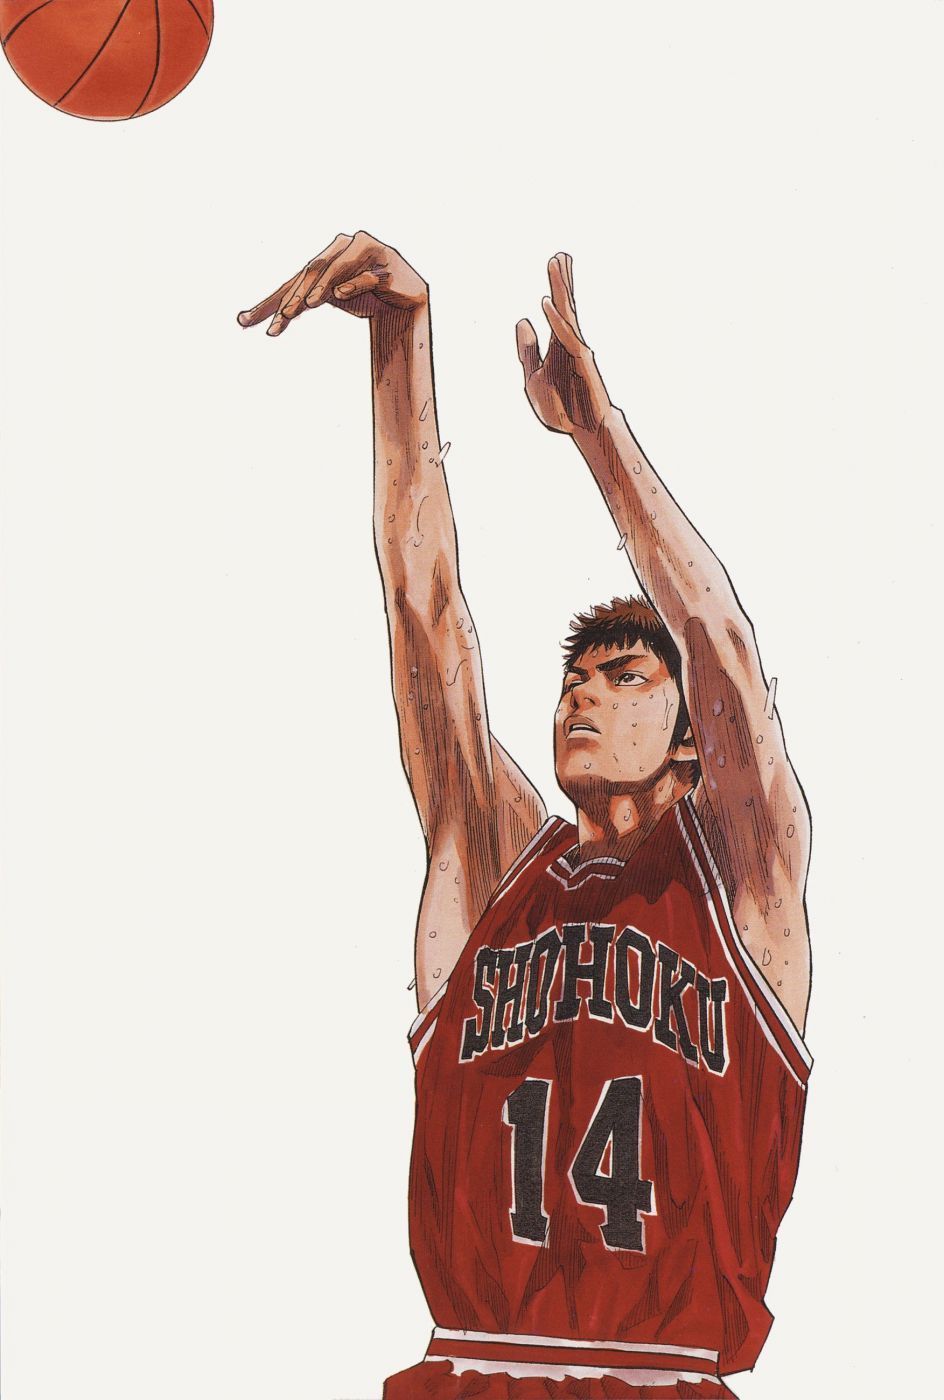 Toei Animation on X This day in 1993 the Shohuku basketball team was  introduced to us on TV screens across Japan Happy anniversary to SLAM  DUNK  slamdunk anniversary anime basketball  httpstcoHIvjMPm8DW 